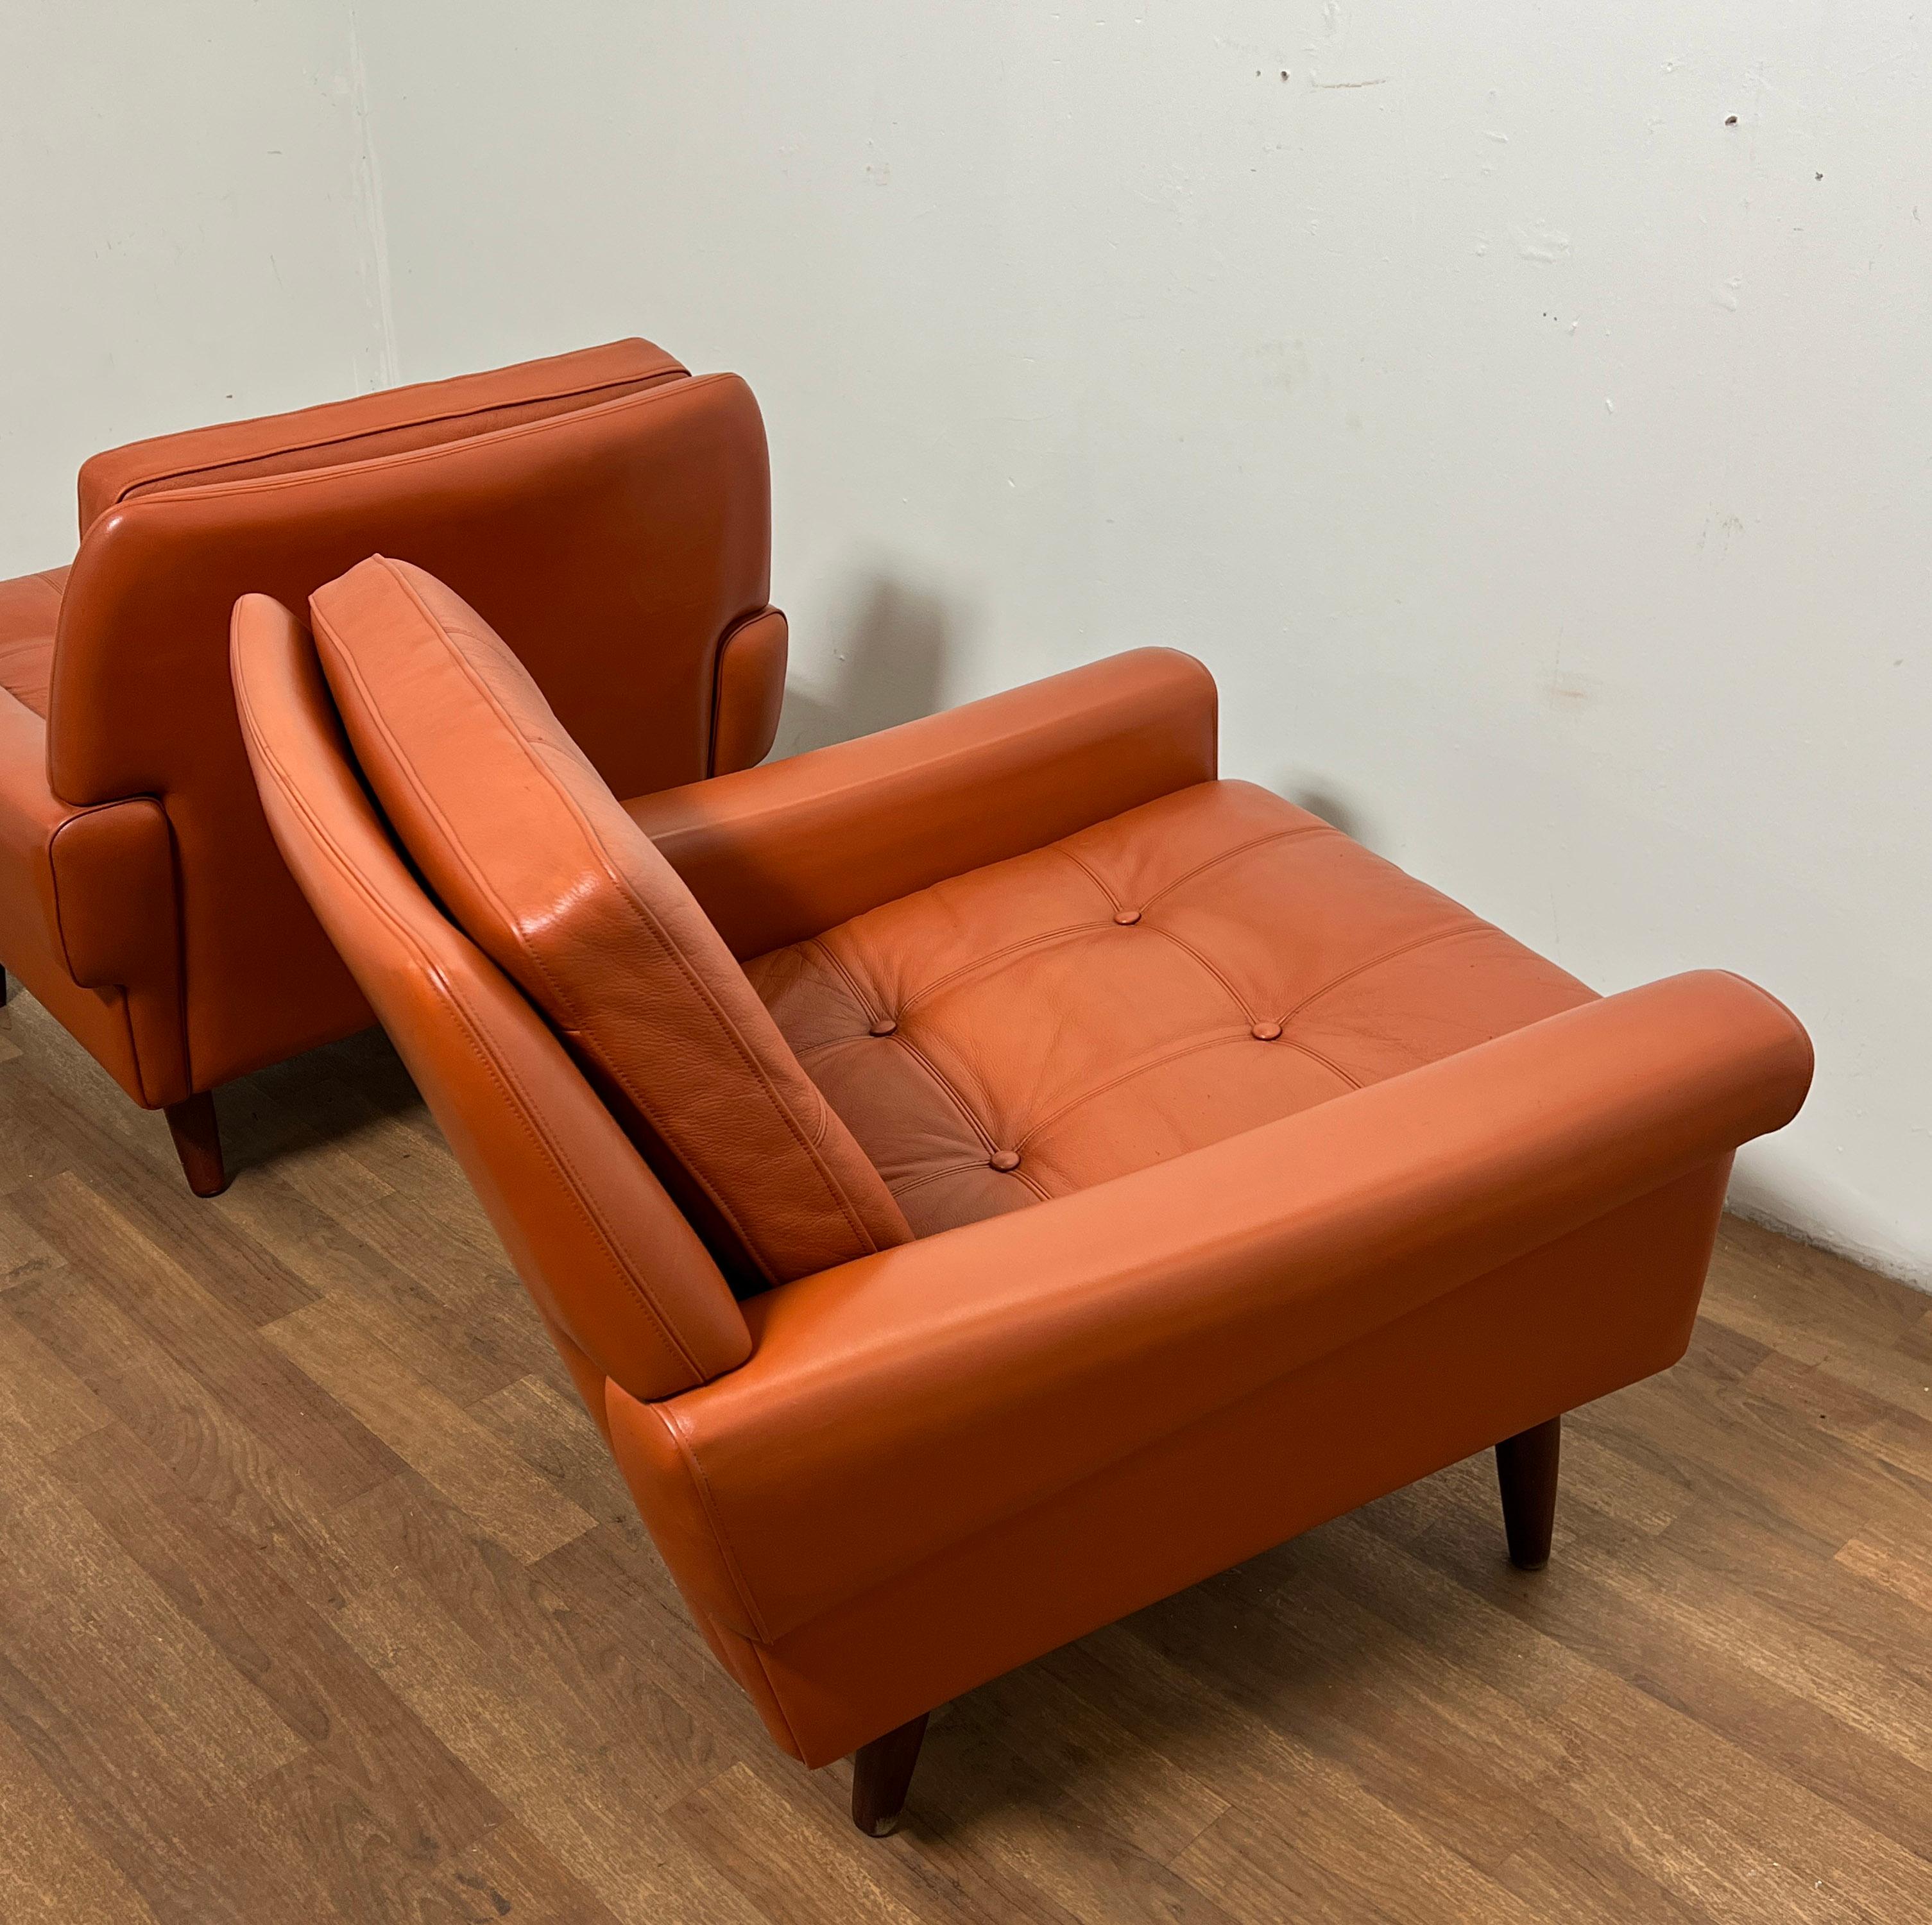 Pair of Danish Leather Lounge Chairs by Svend Skipper, Circa 1960s For Sale 5